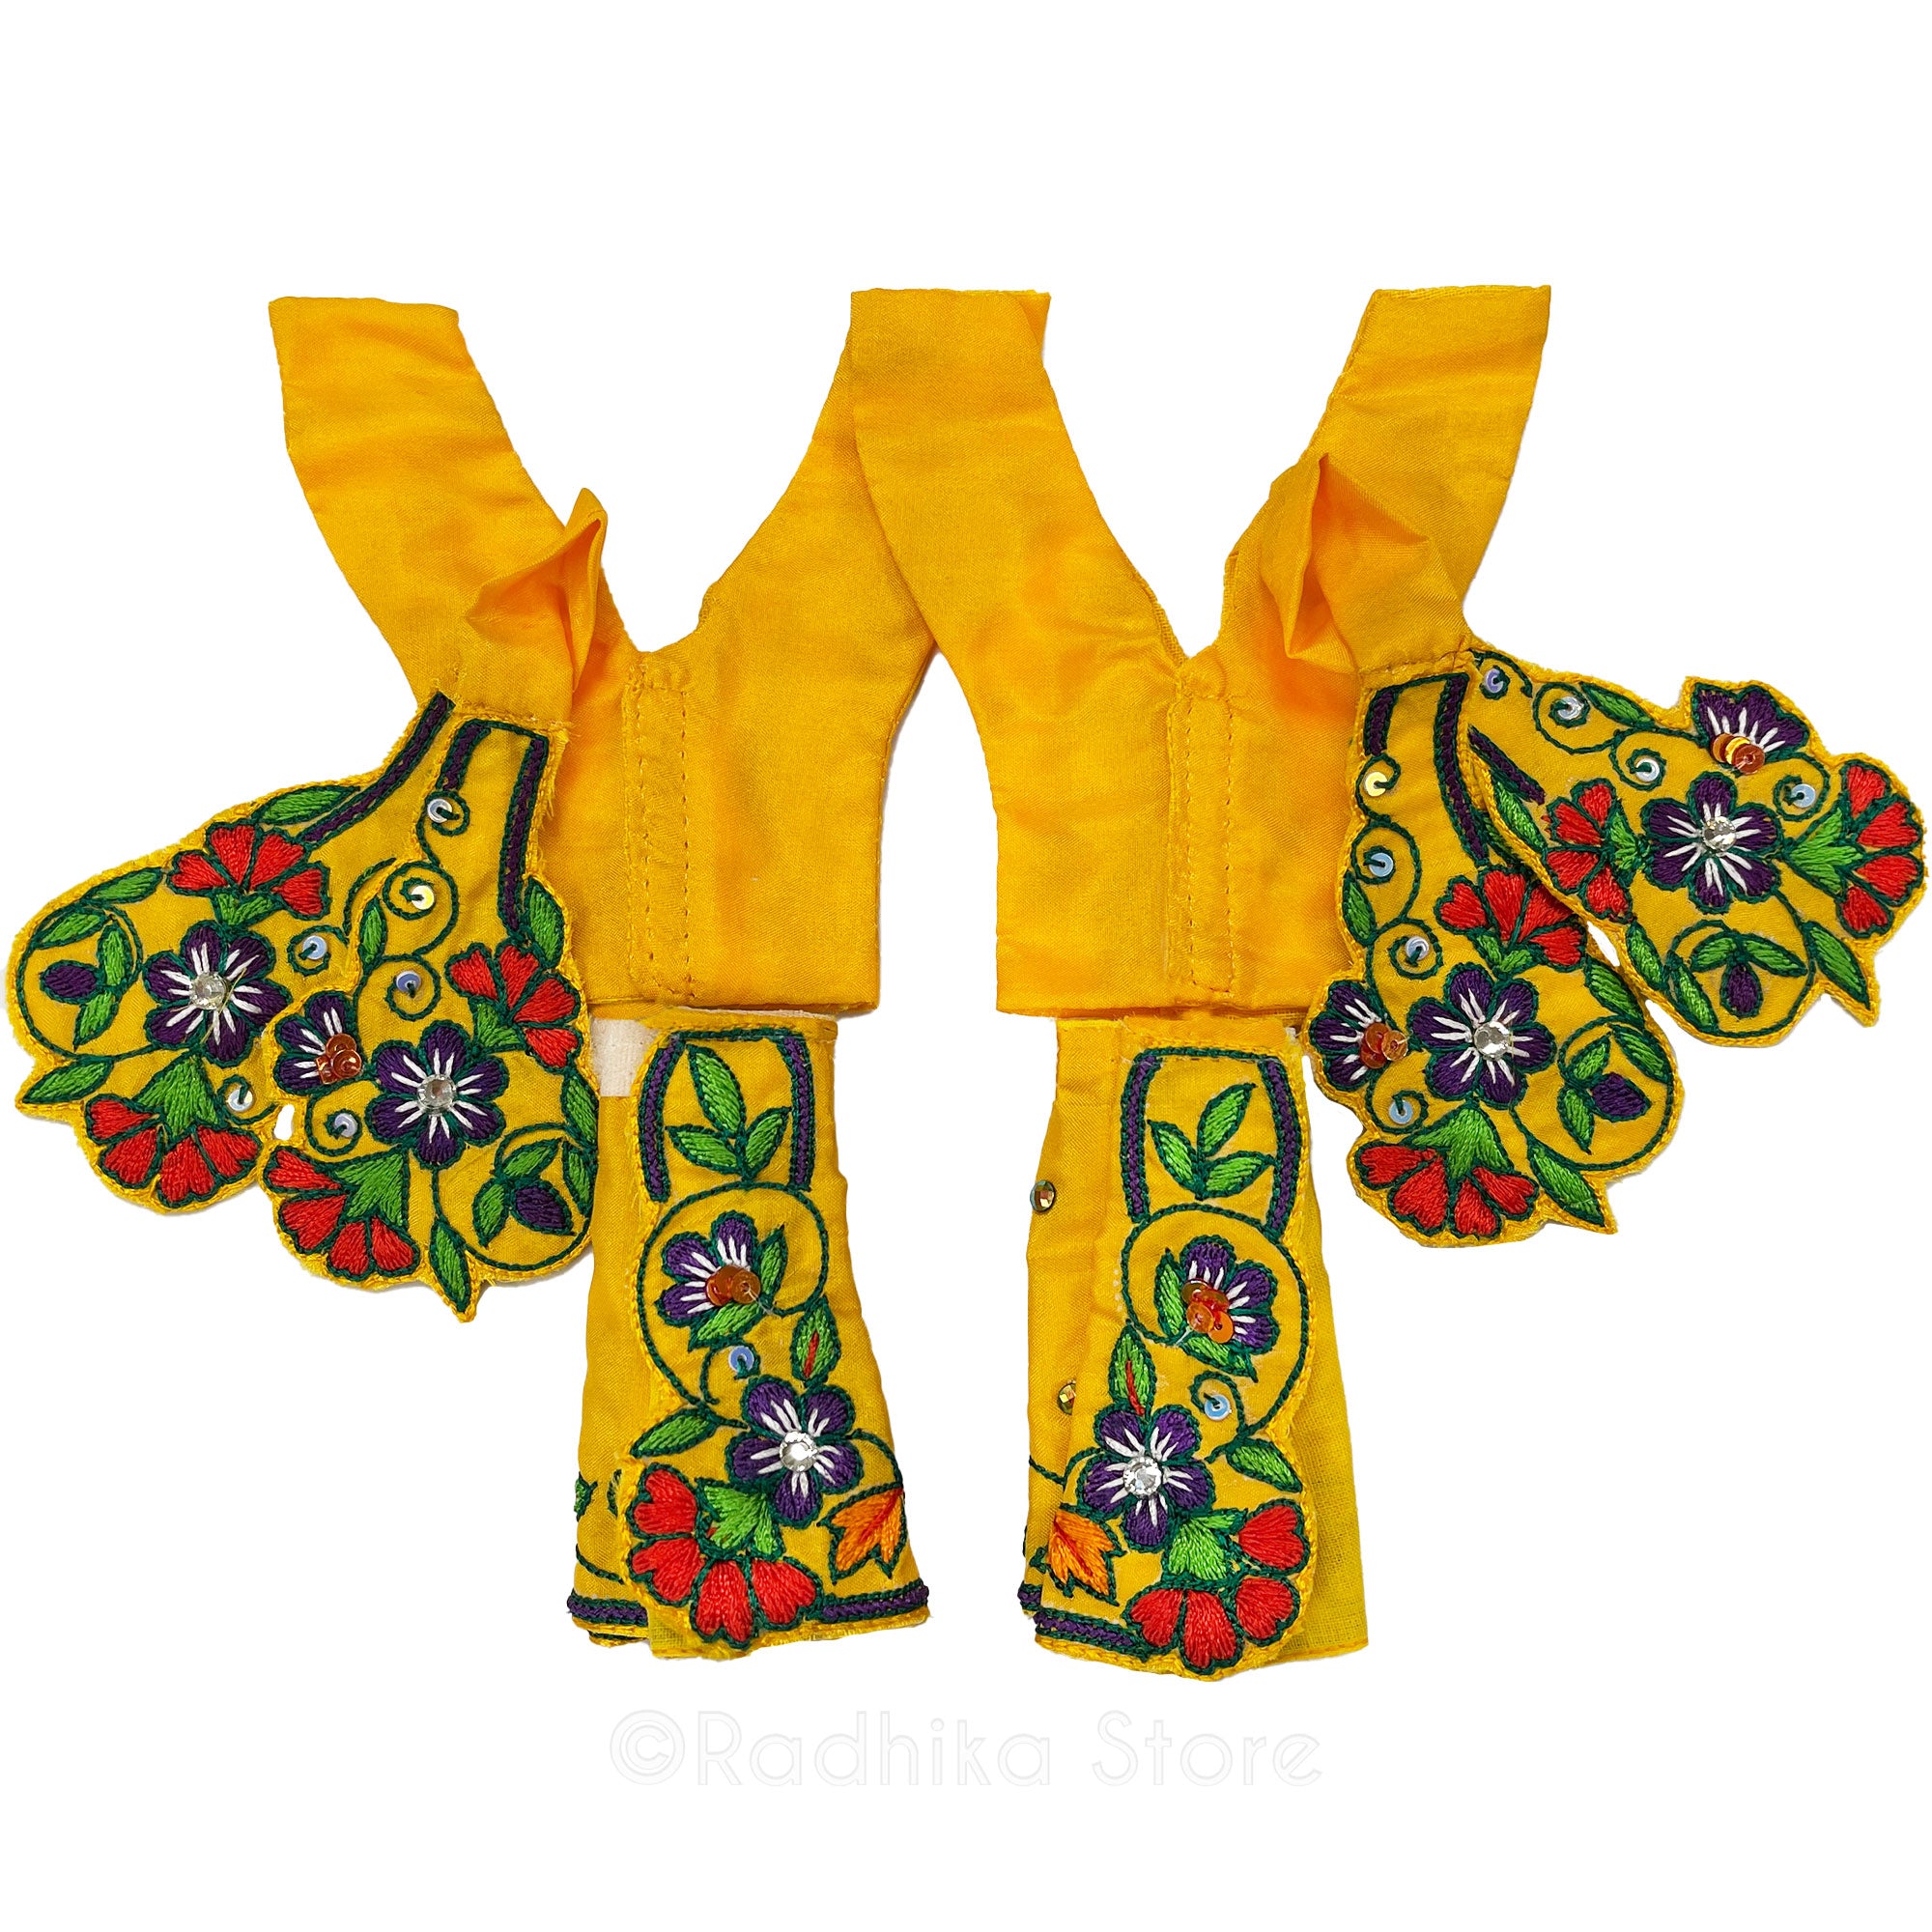 Candle Light Flowers - Marigold Color Satin - Gaura Nitai Deity Outfit